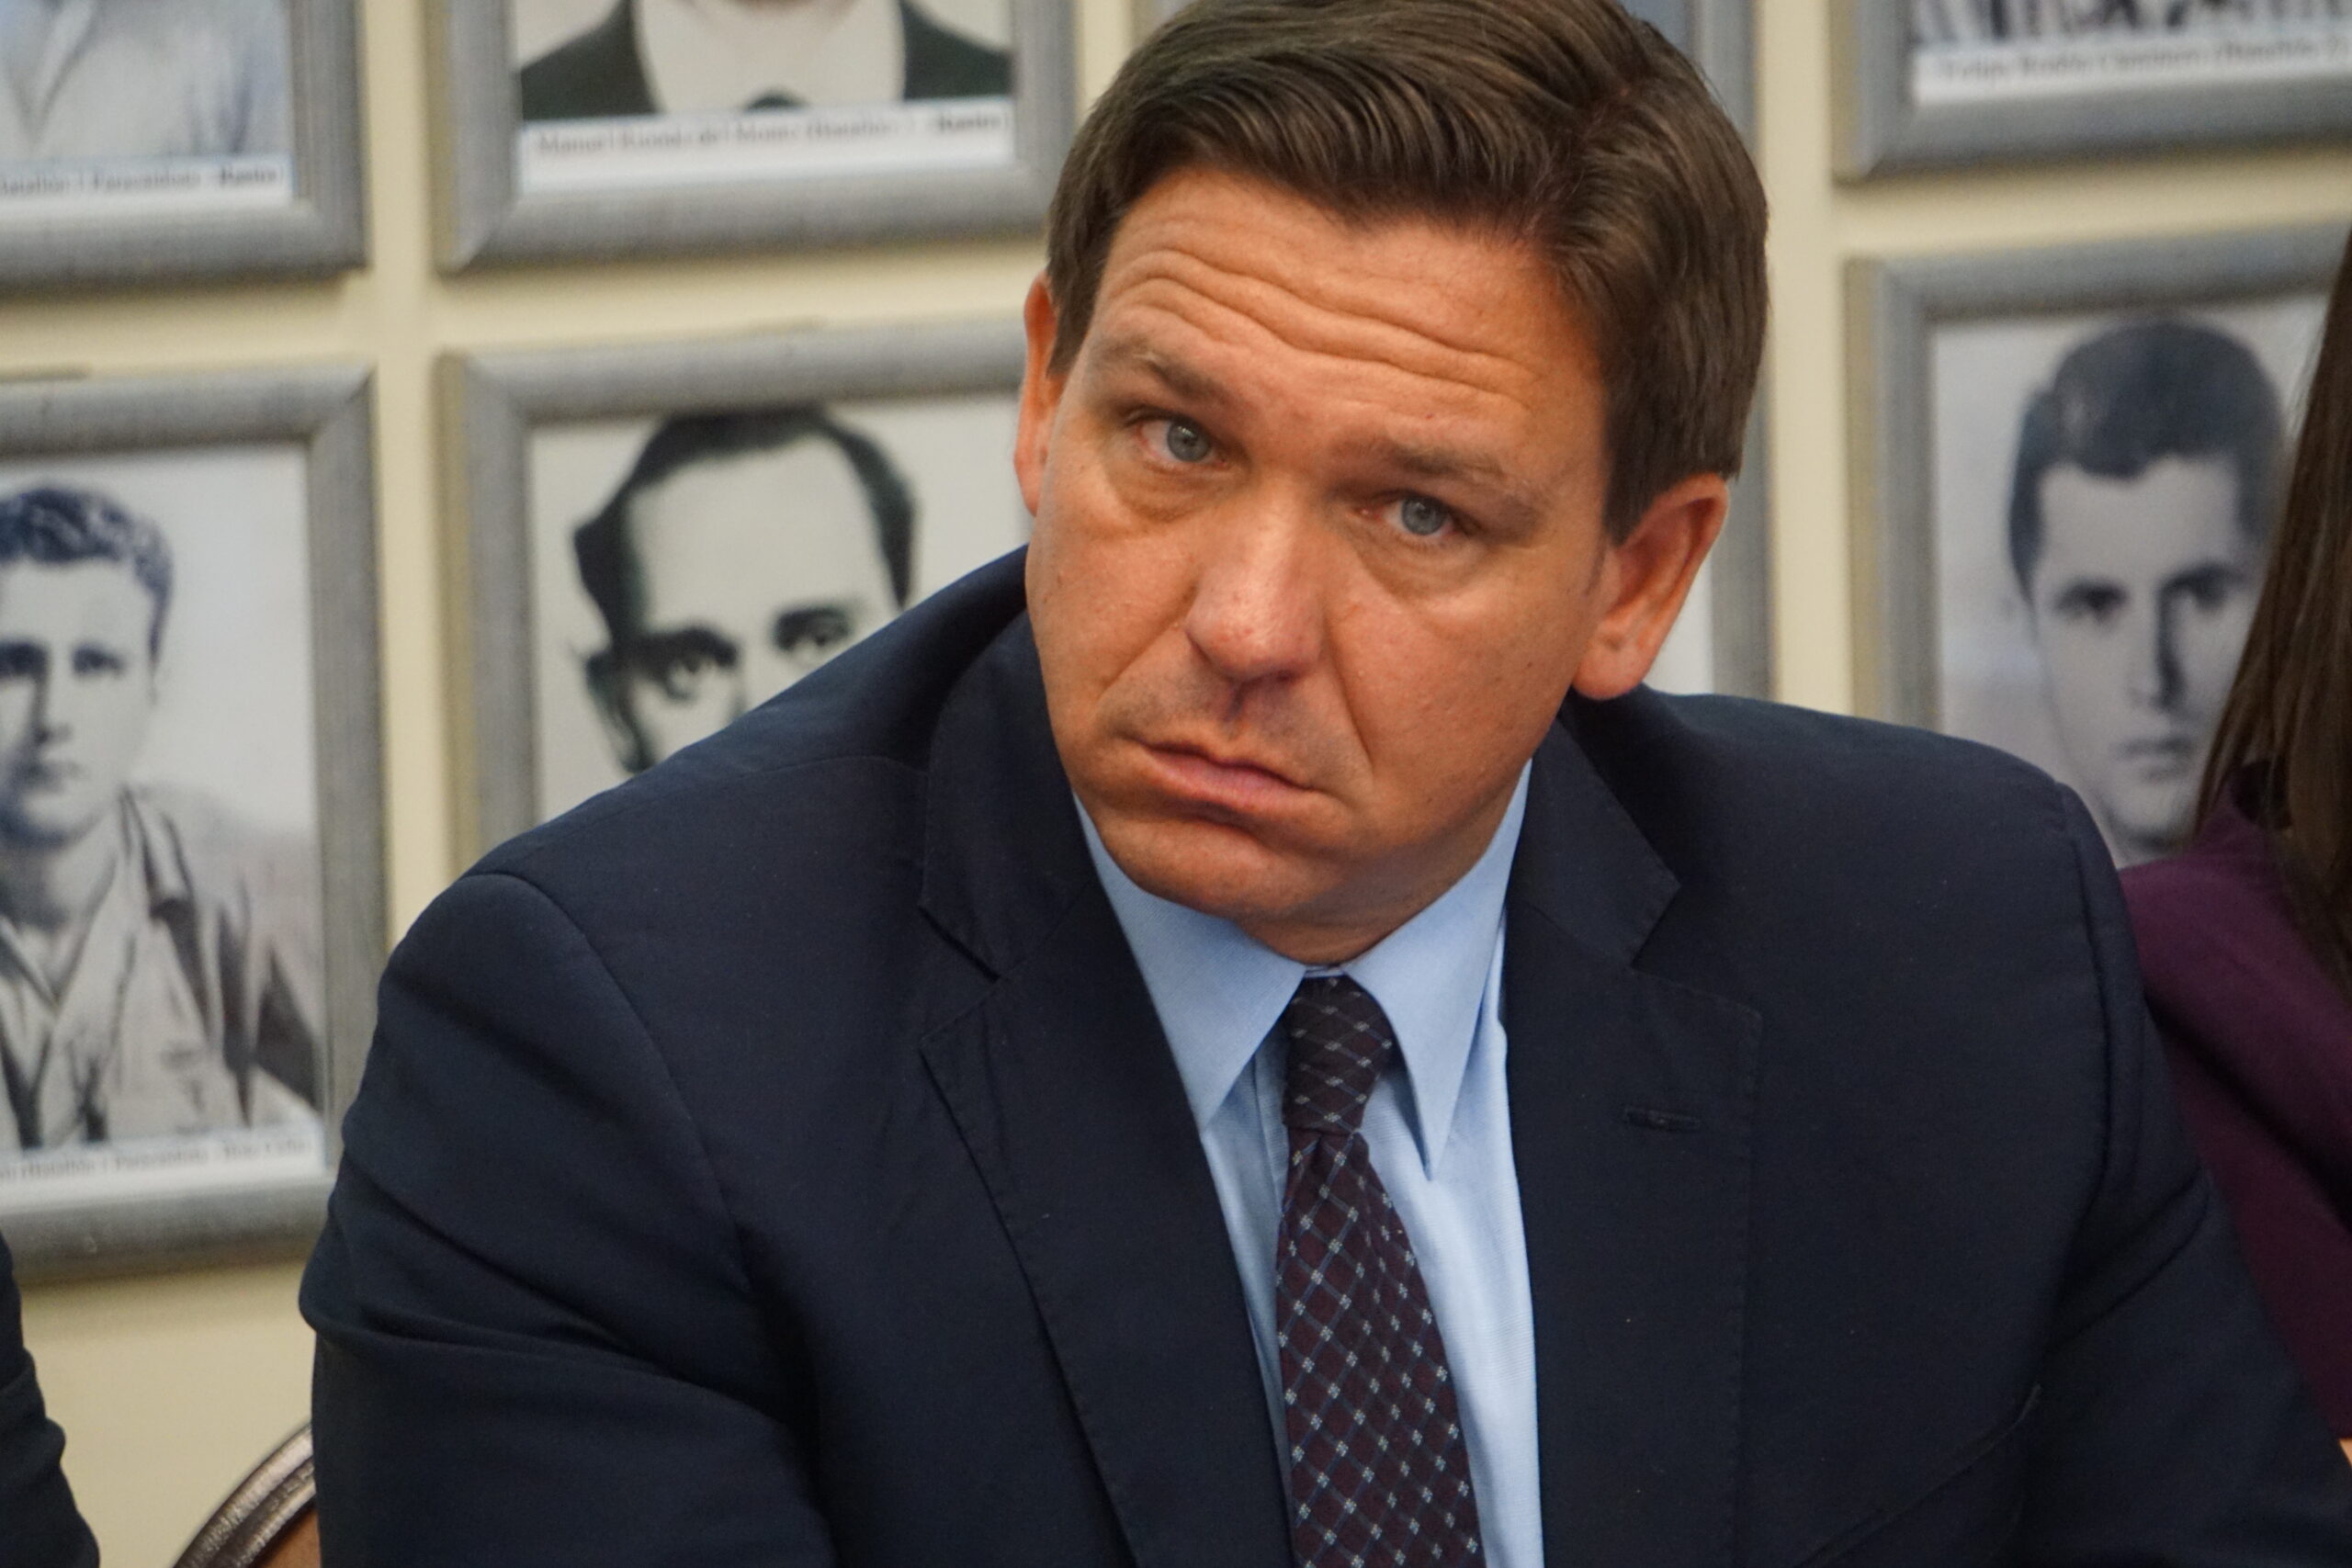 DeSantis Tears into Push for Special Session on Gun Control